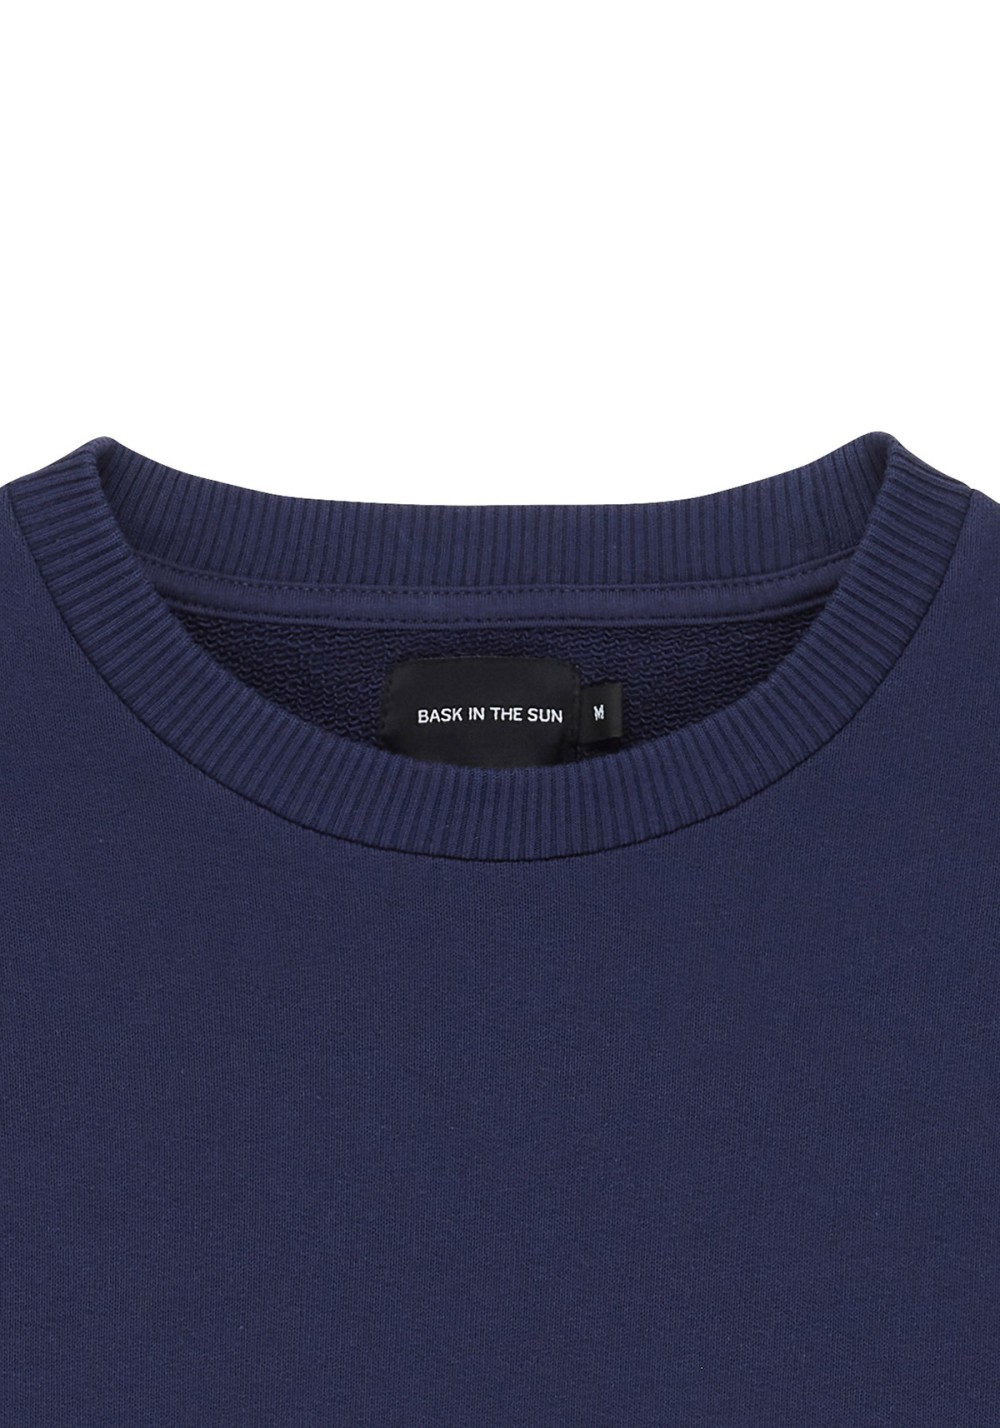 Bask in the Sun - Sweater Freedom Navy